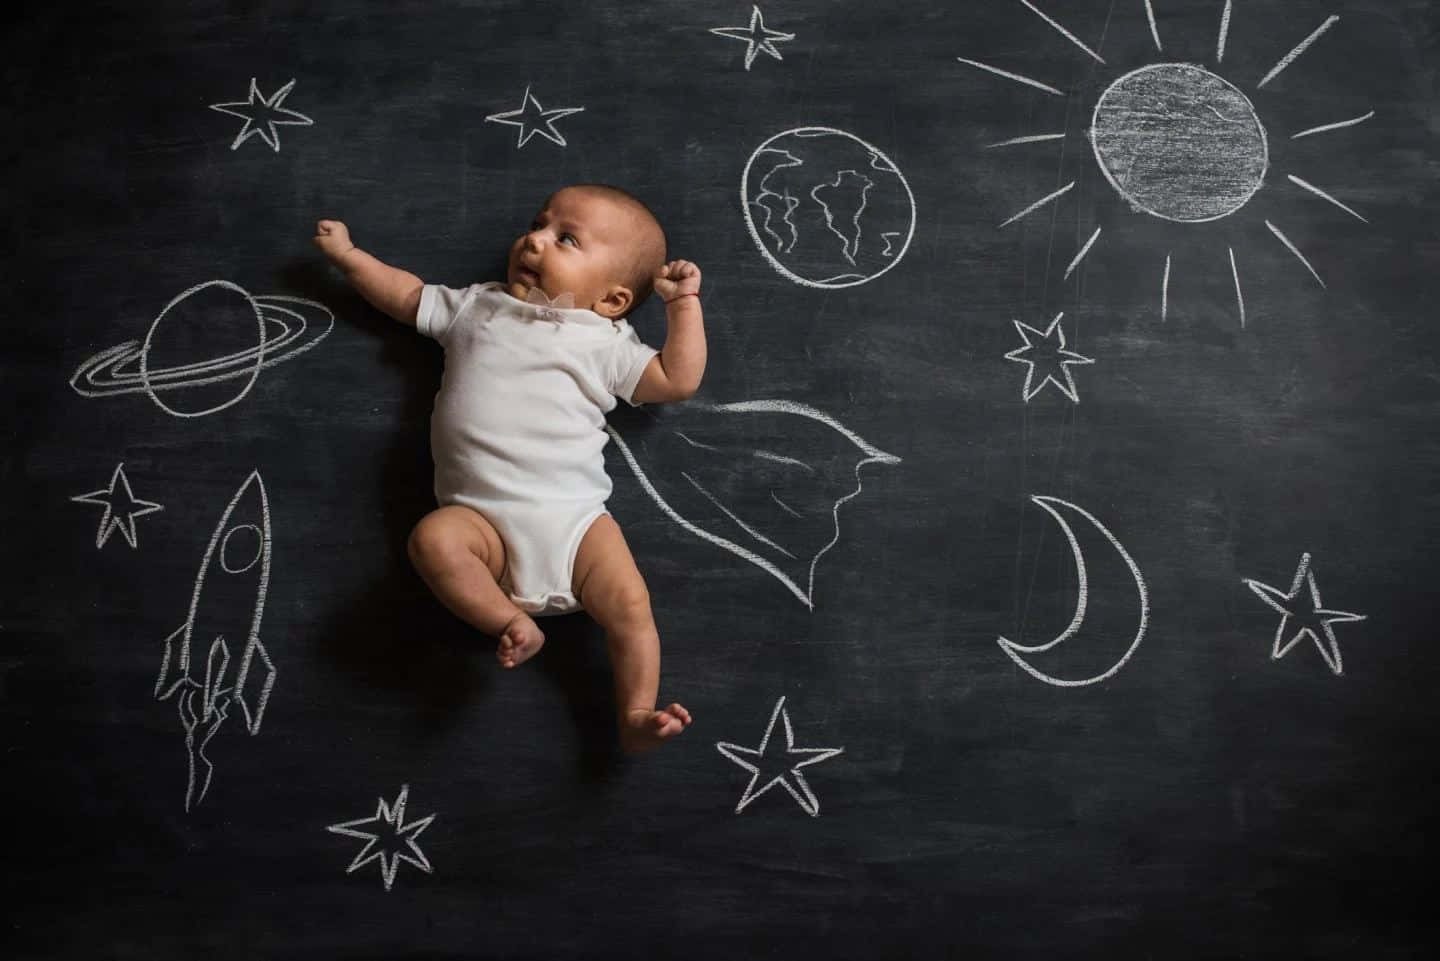 A Baby Laying On A Chalkboard With Stars And Planets Drawn On It